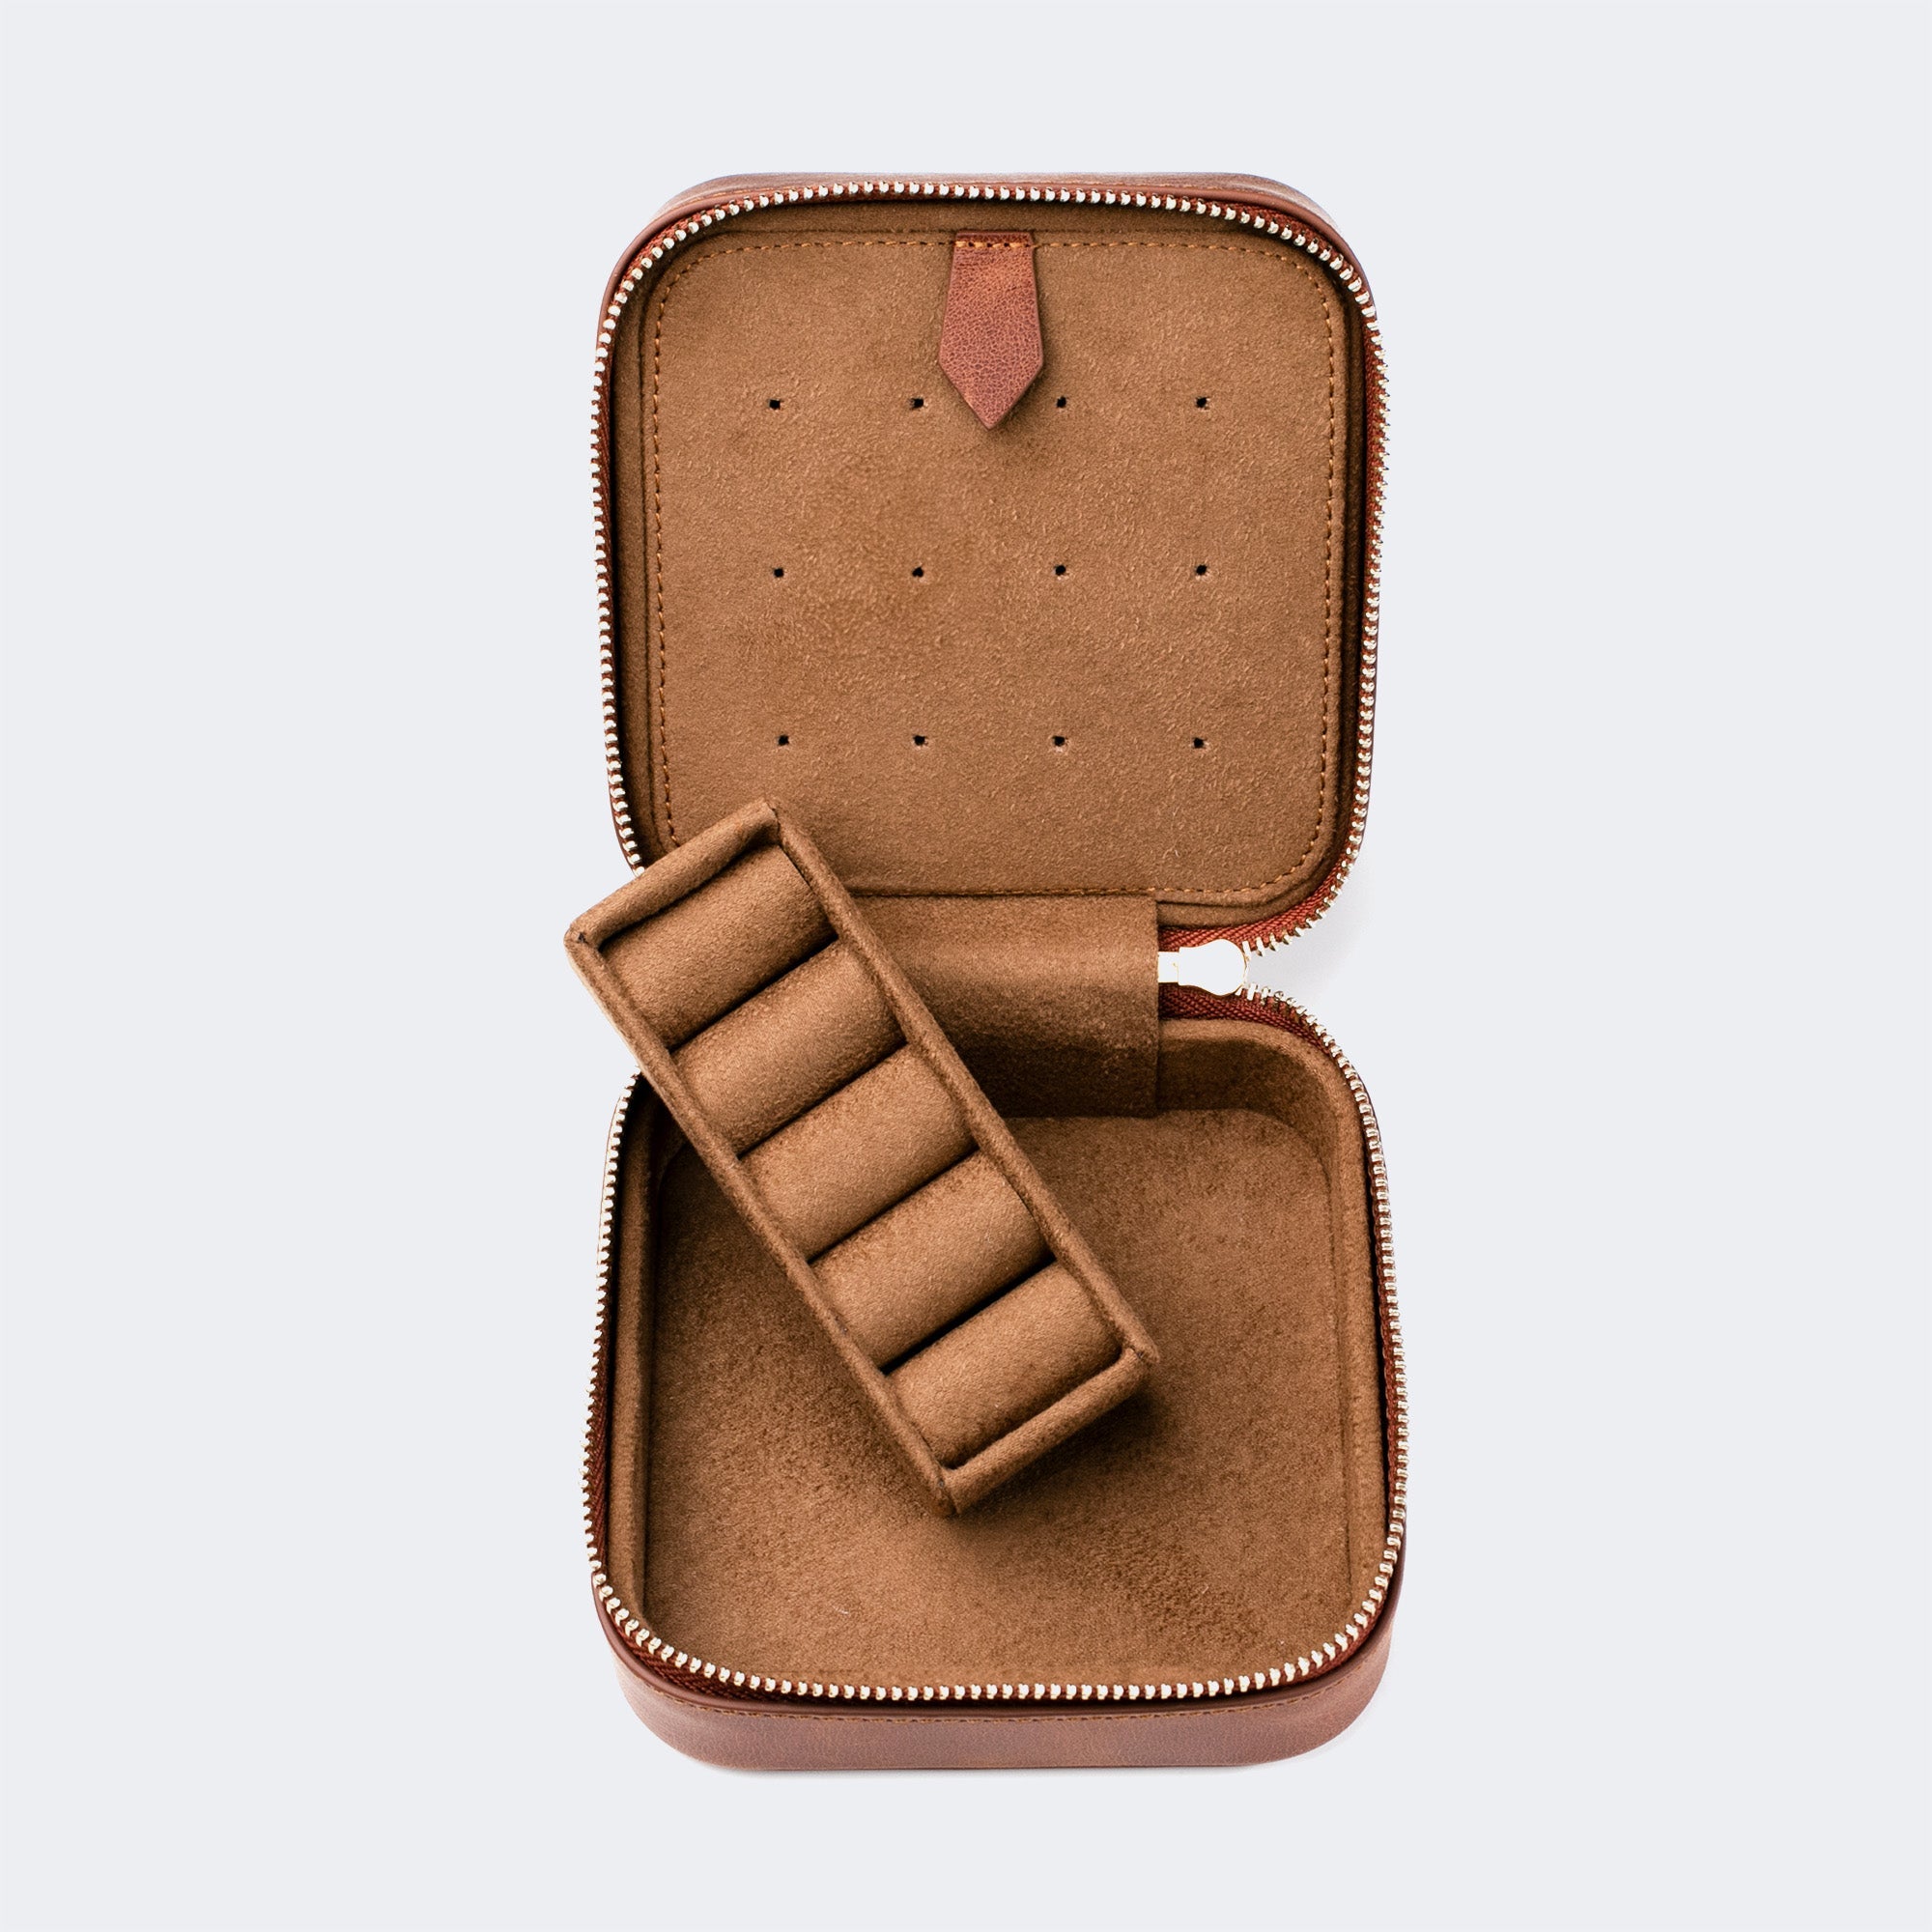 Leather Jewelry Case - Tobacco